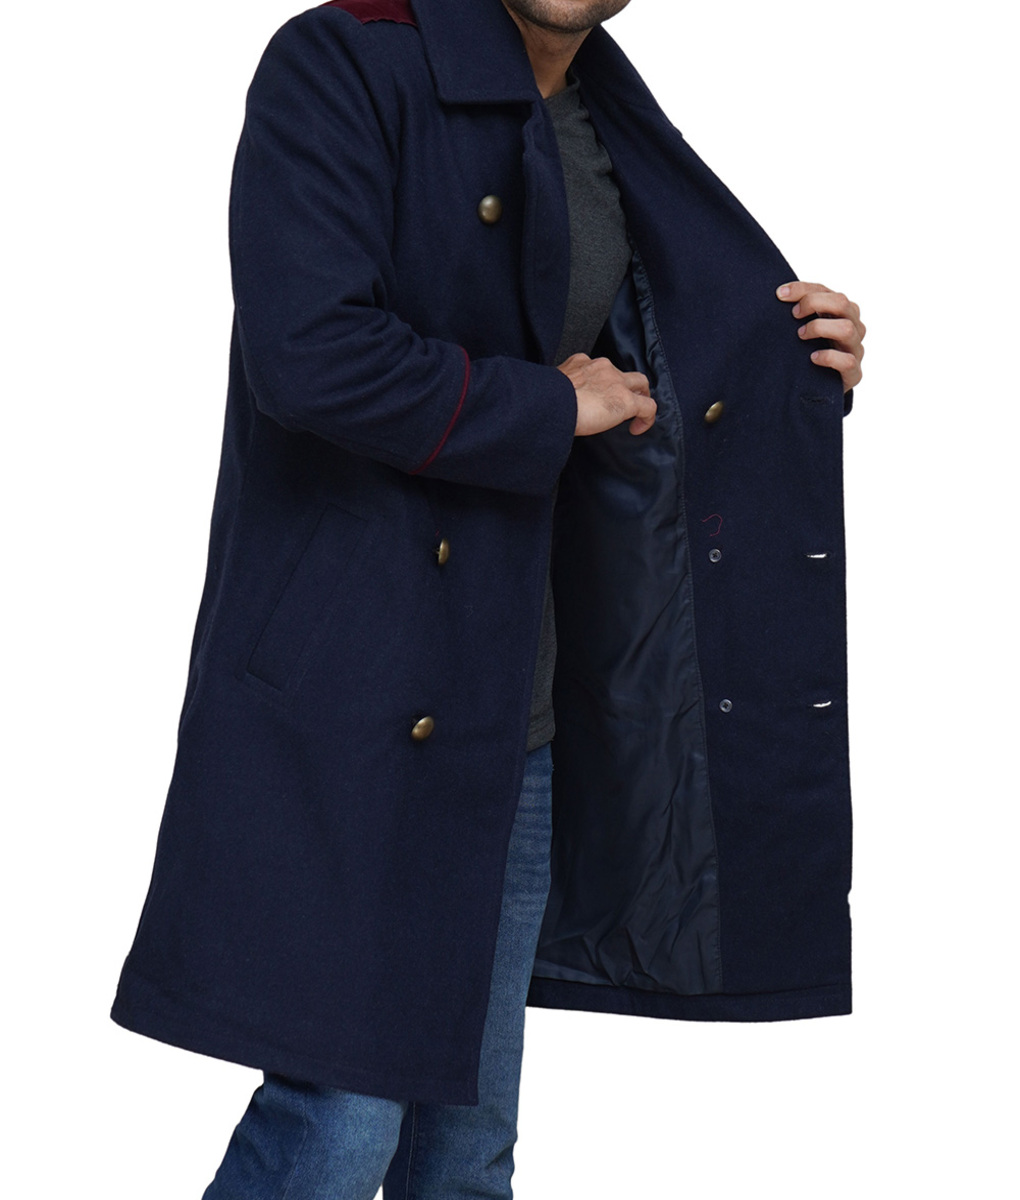 Mens_Double_Breasted_Wool_coat